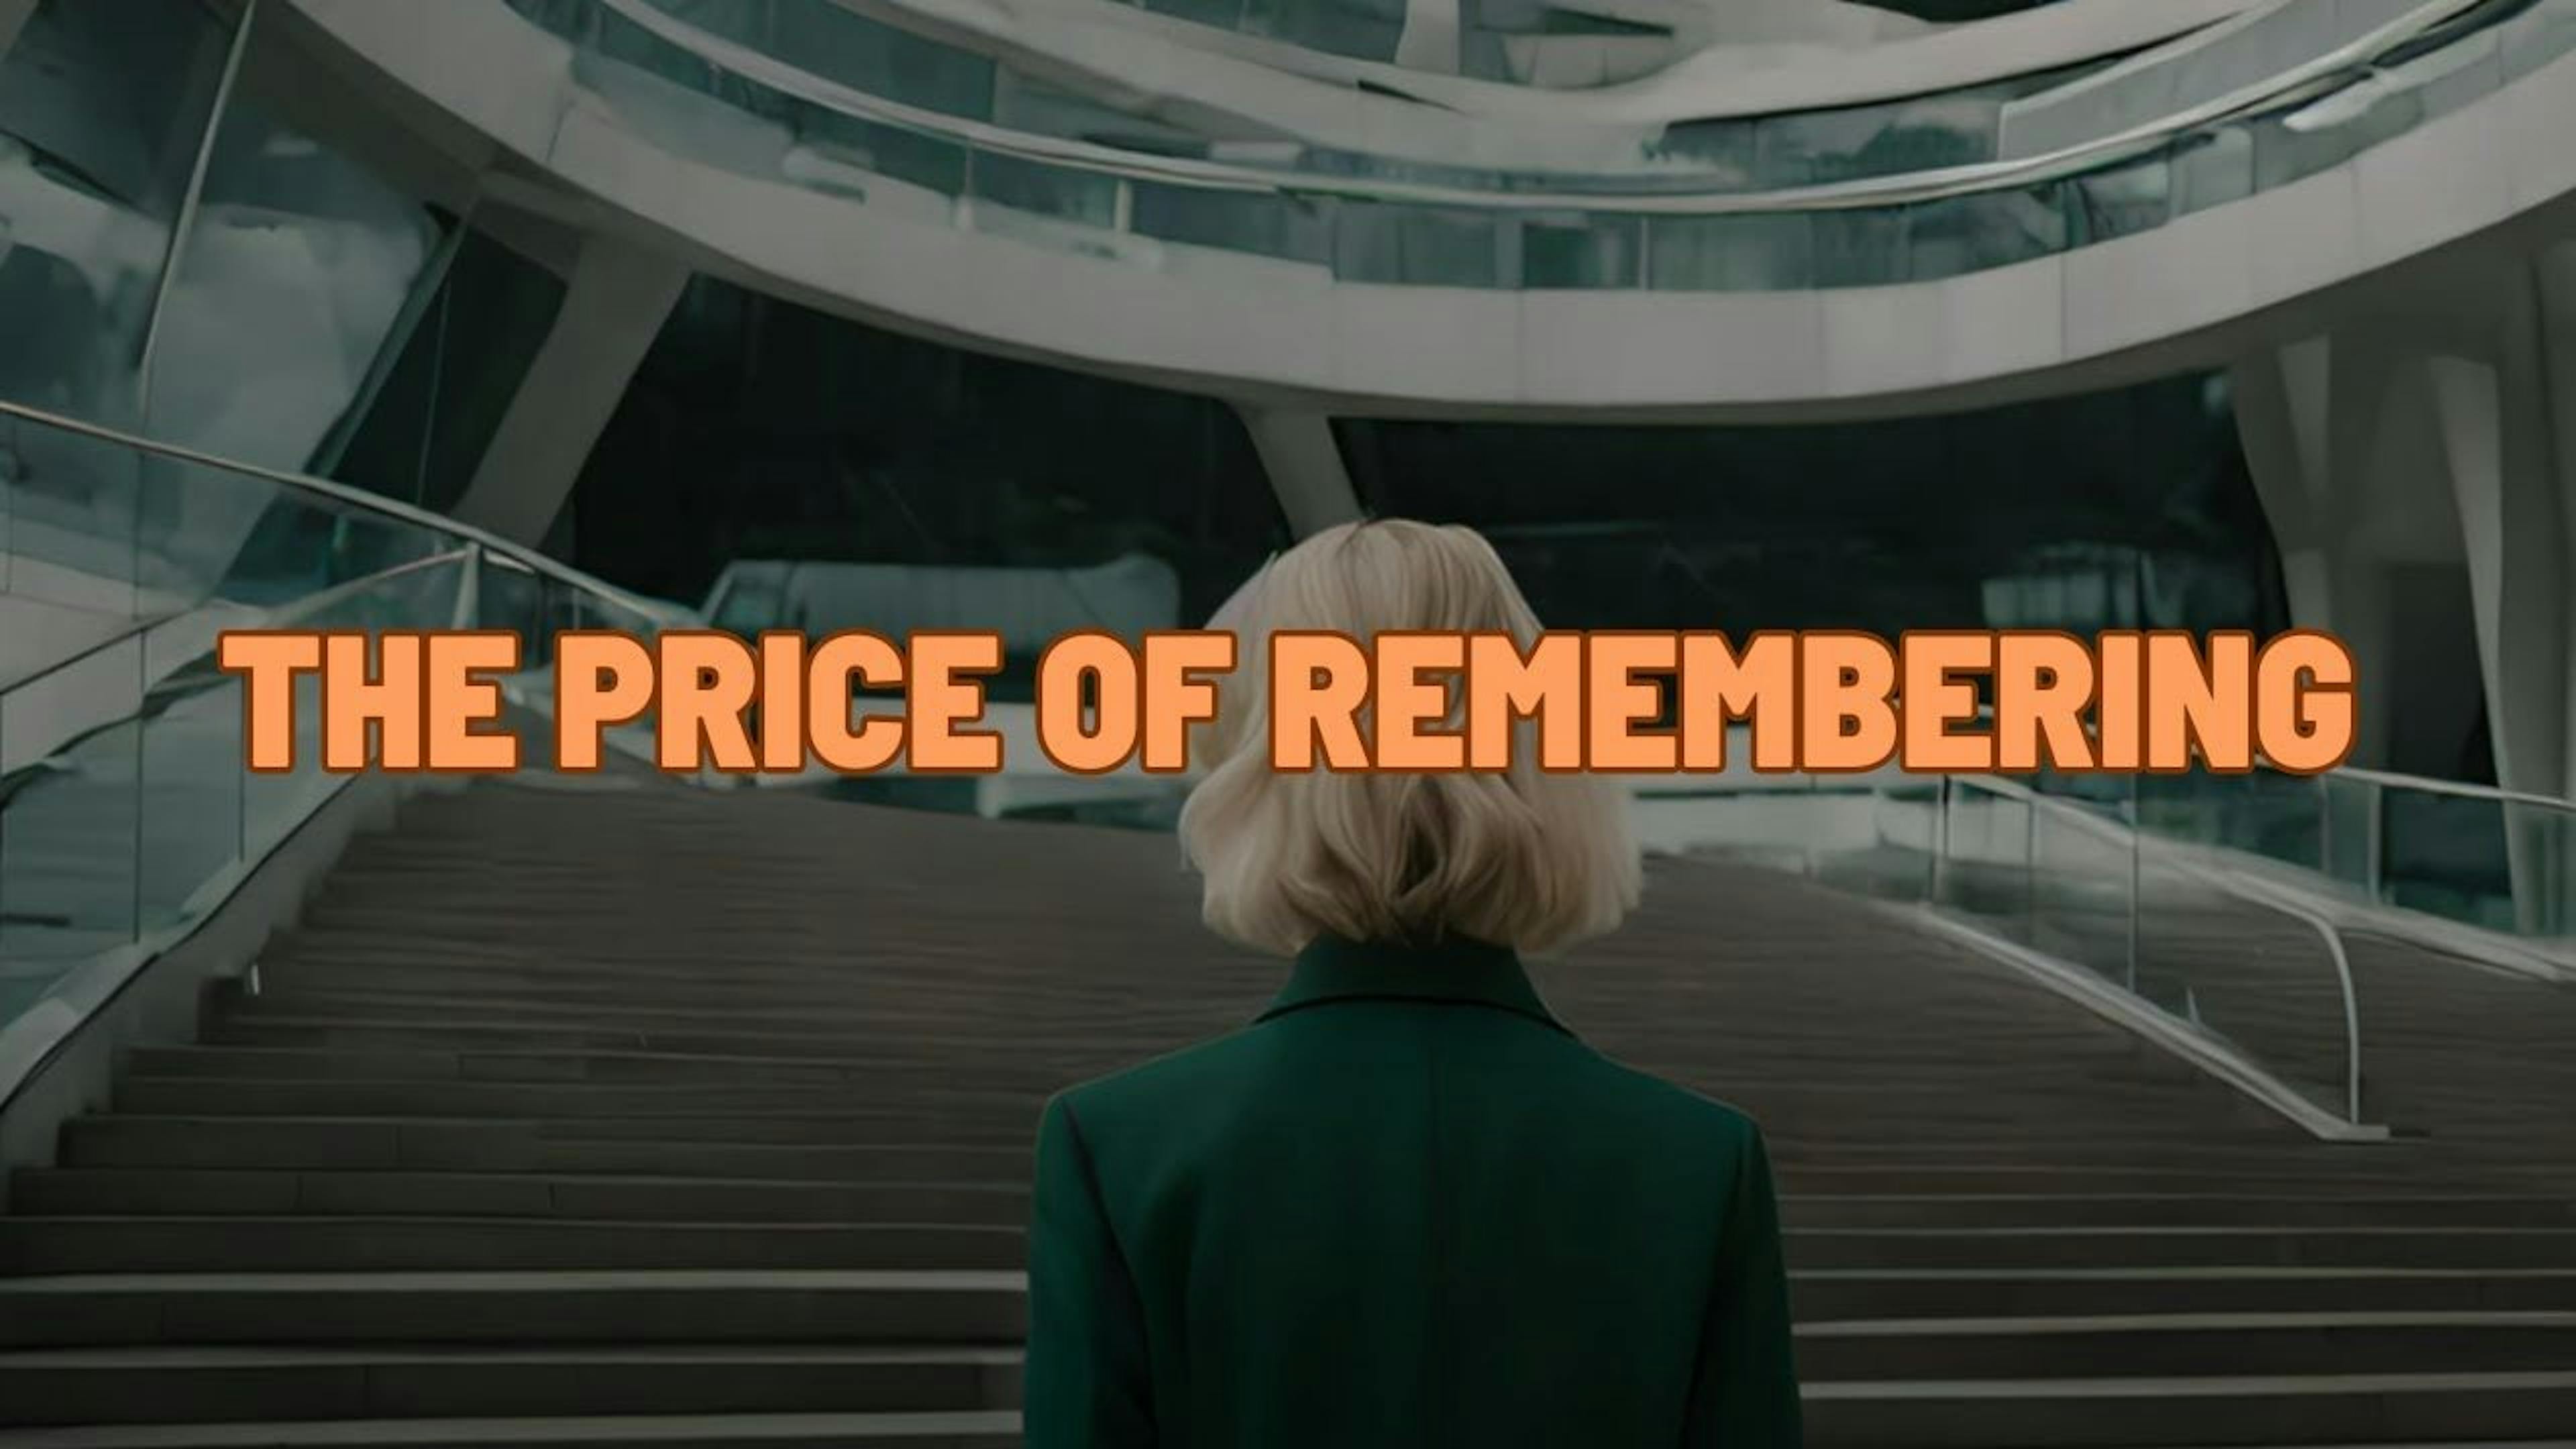 The Price of Remembering